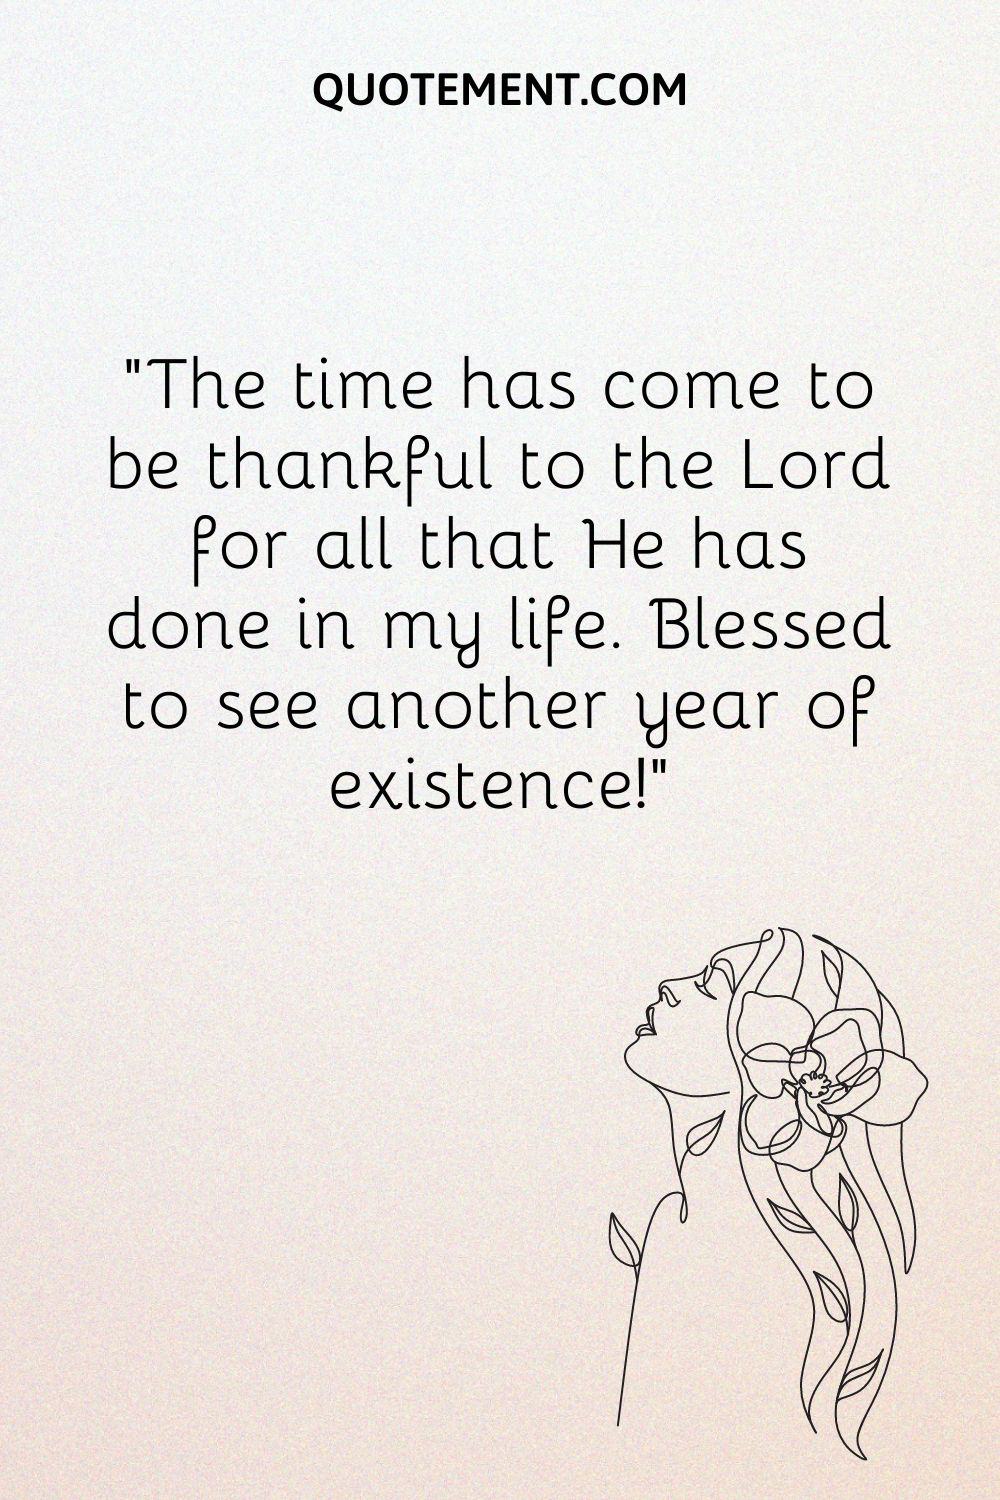 The time has come to be thankful to the Lord for all that He has done in my life